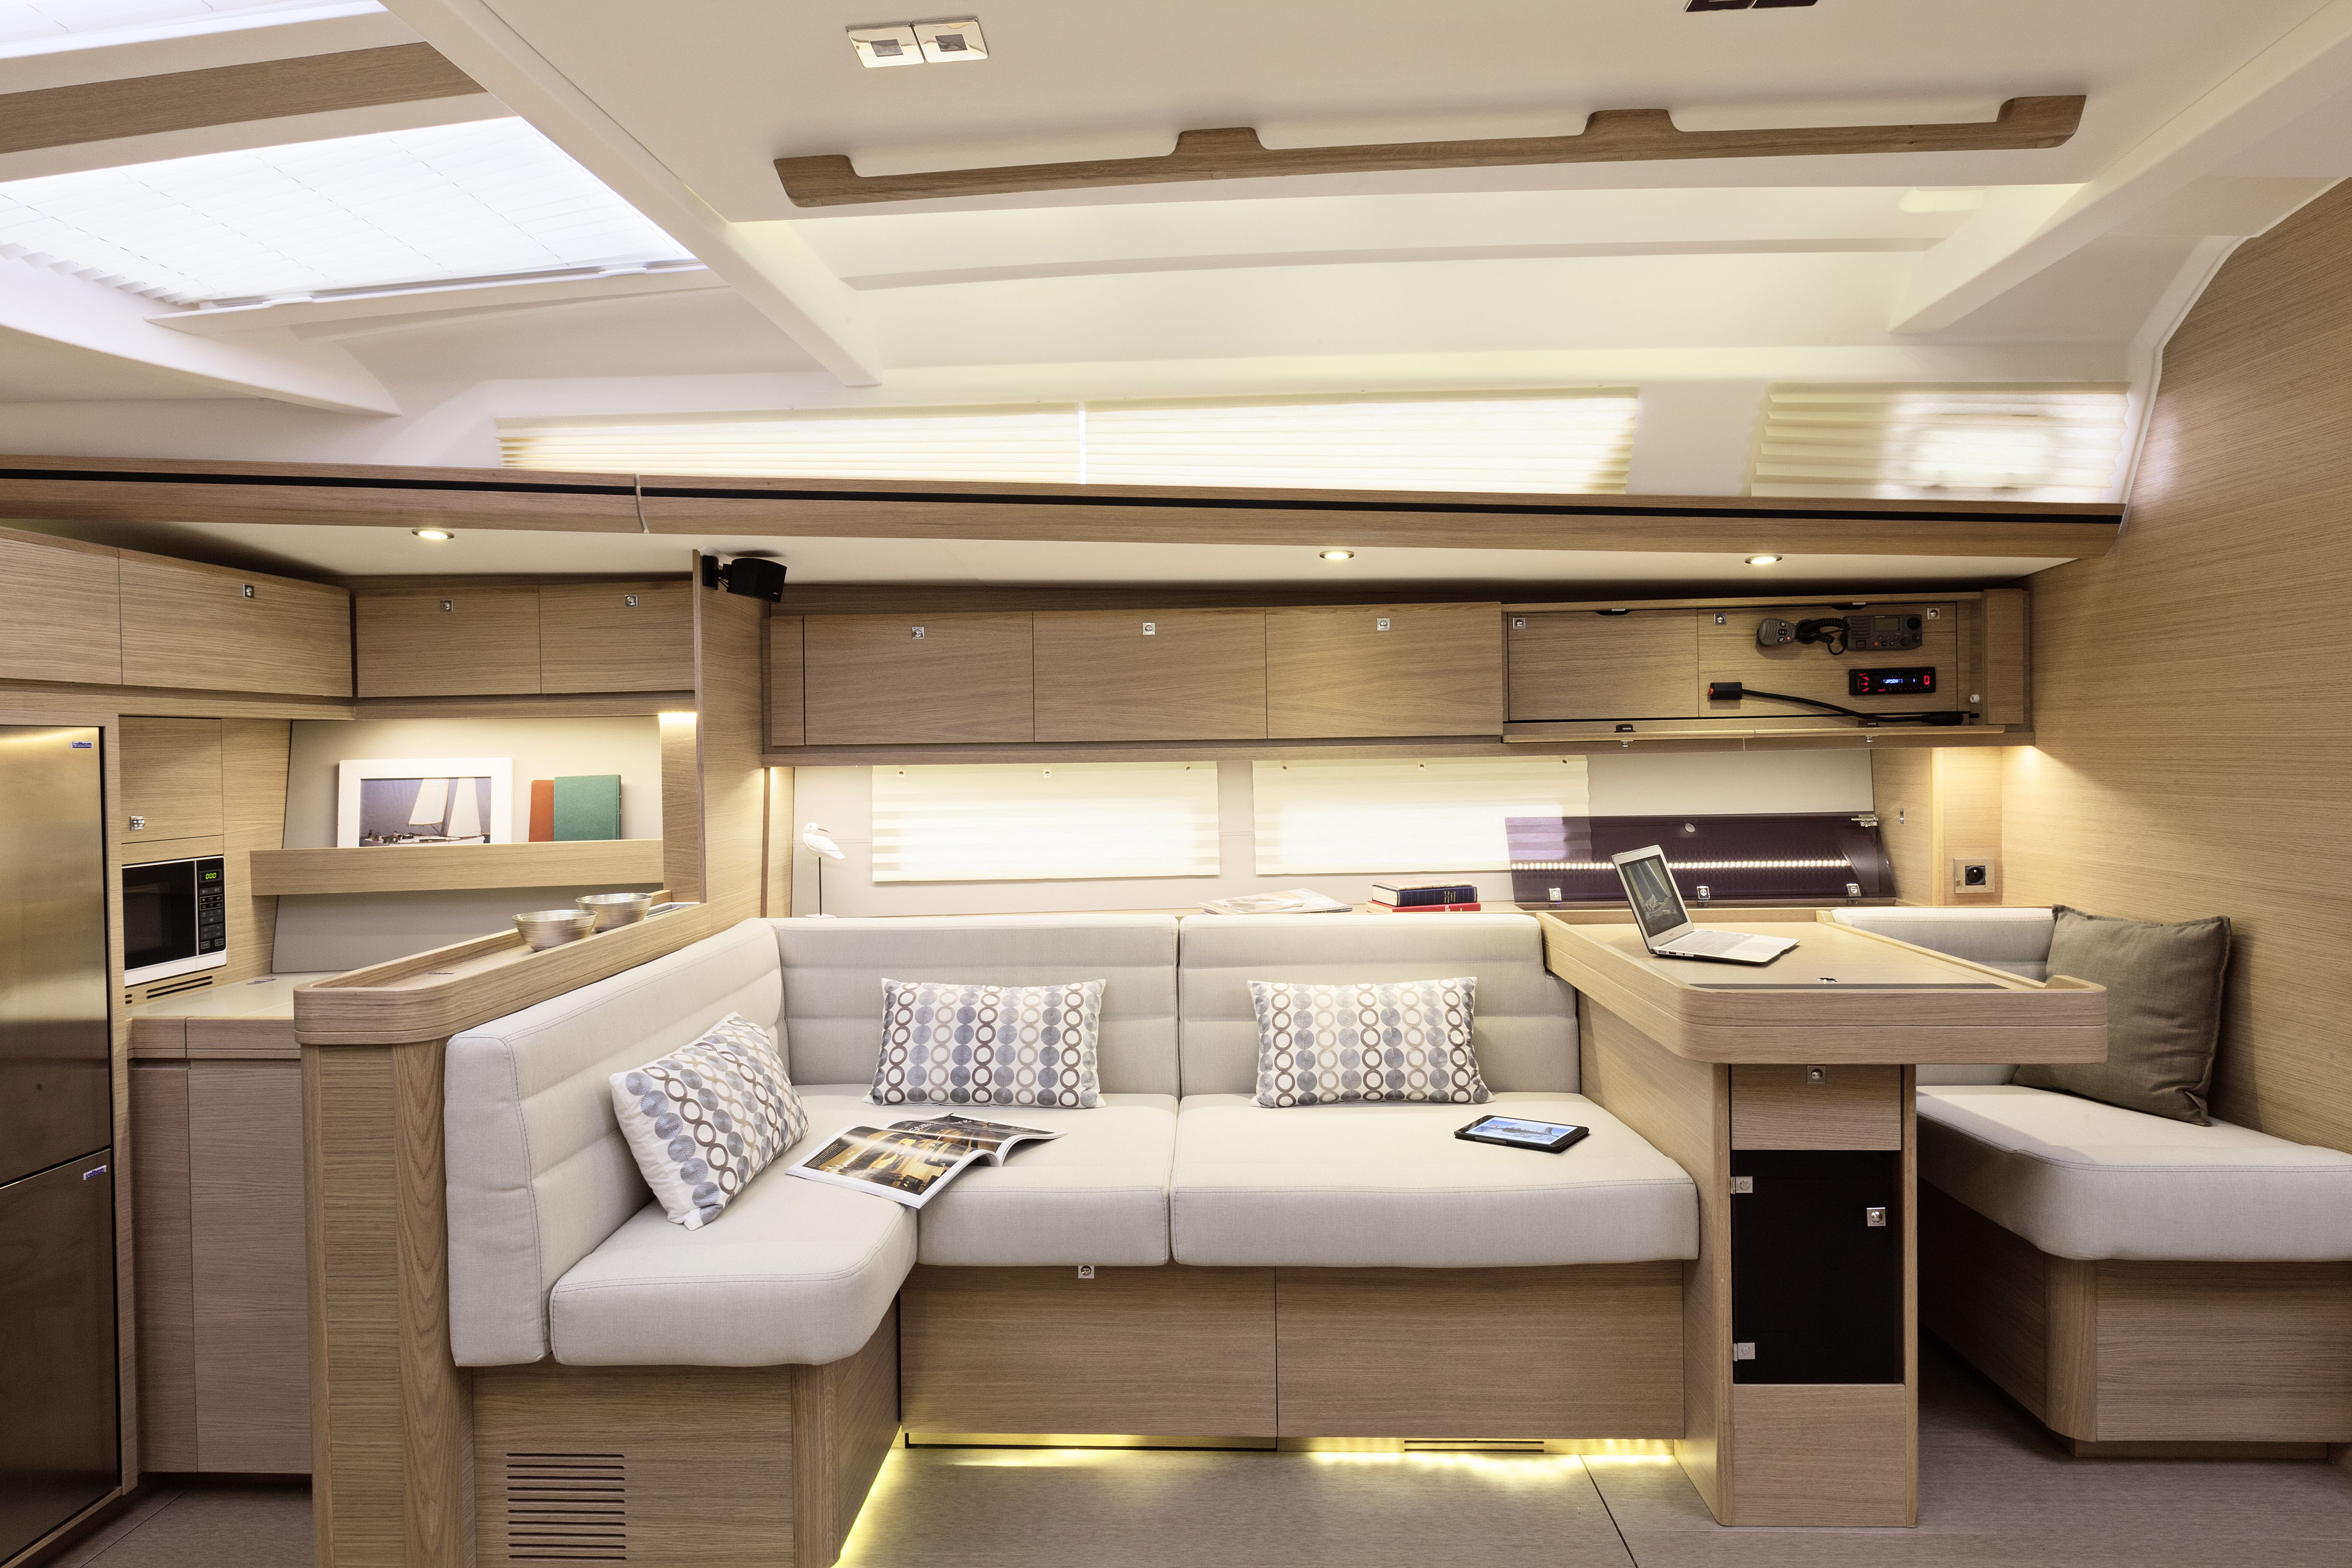 Dufour Yachts :: How the Boats Are Built